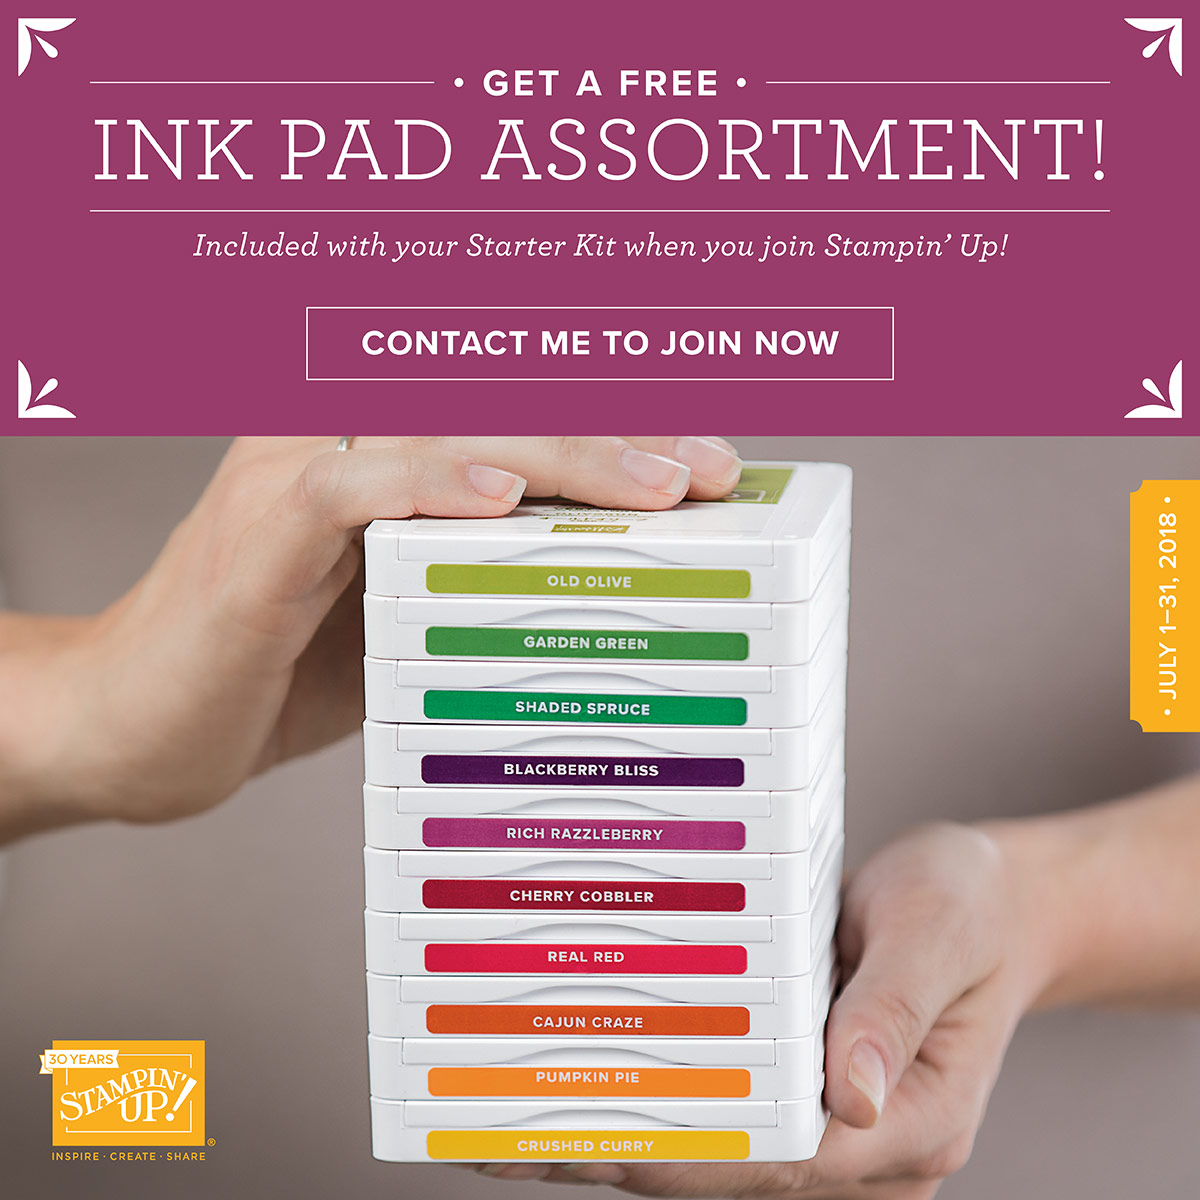 Ink Pad Promotion